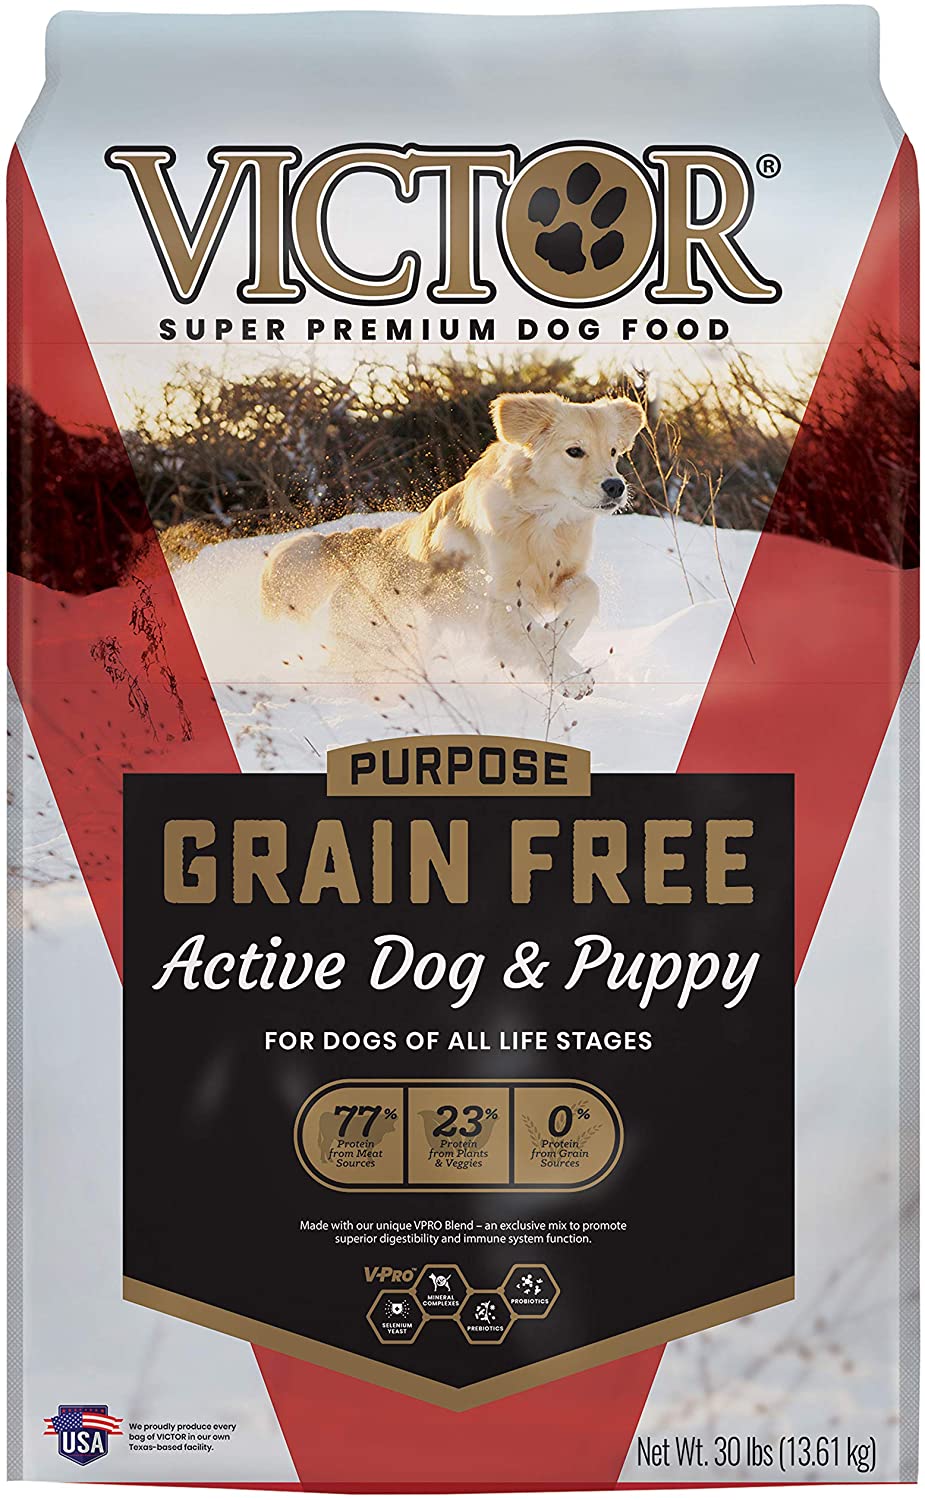 Victor Grain Free Active Puppy and Dog Dry Food Dry Dog Food - 40 lb Bag  